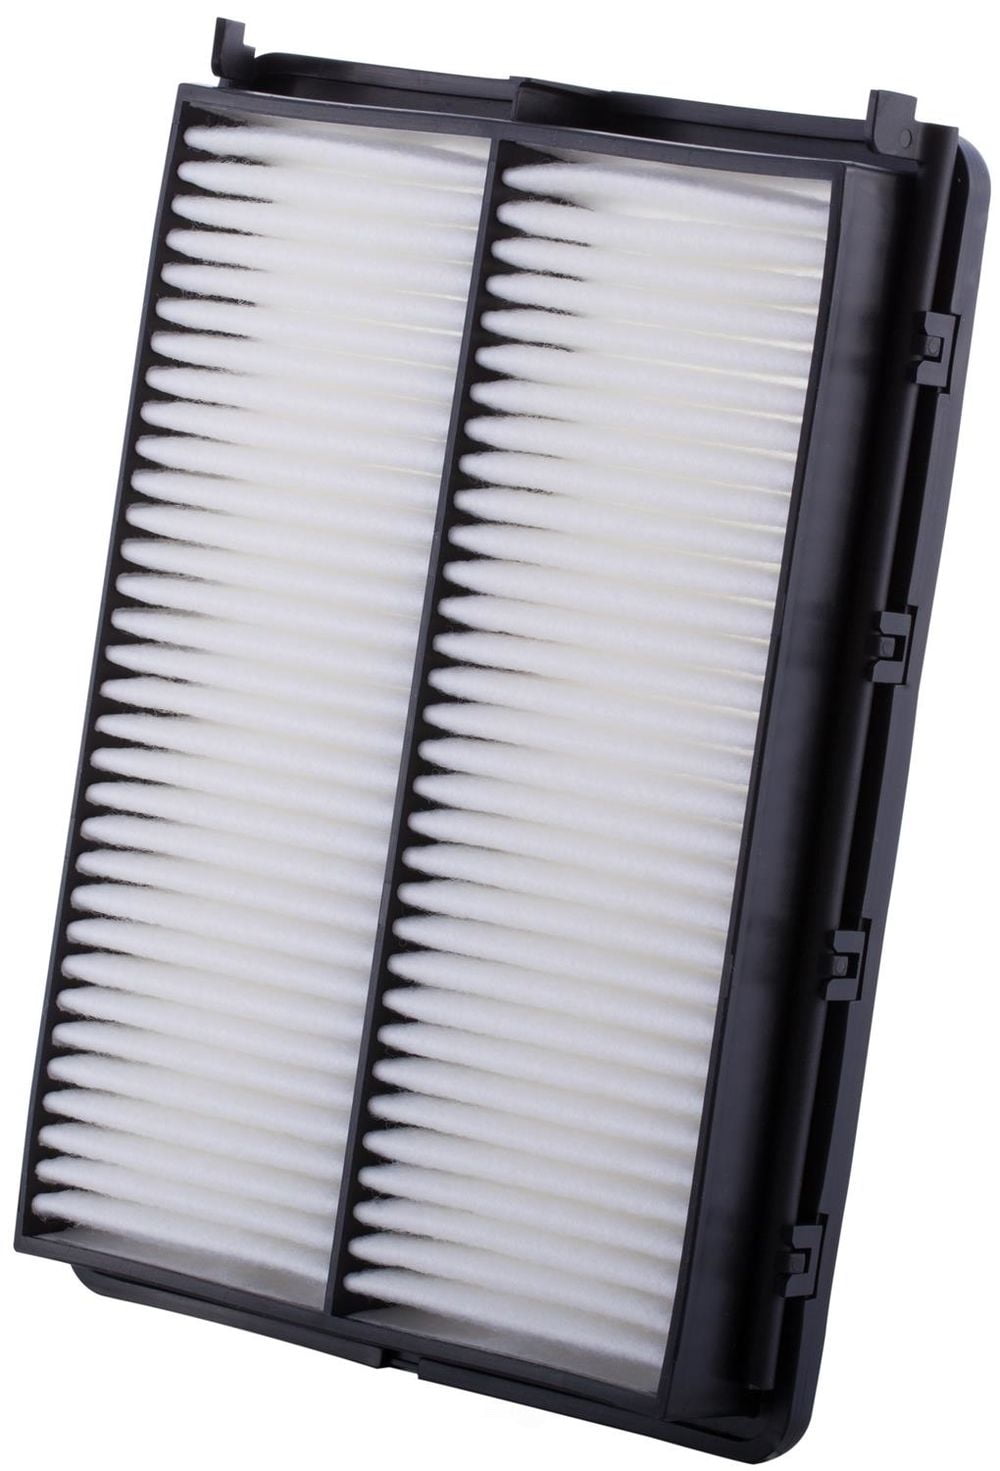 Cabin Air Filter-Charcoal Media Pronto PC9366 